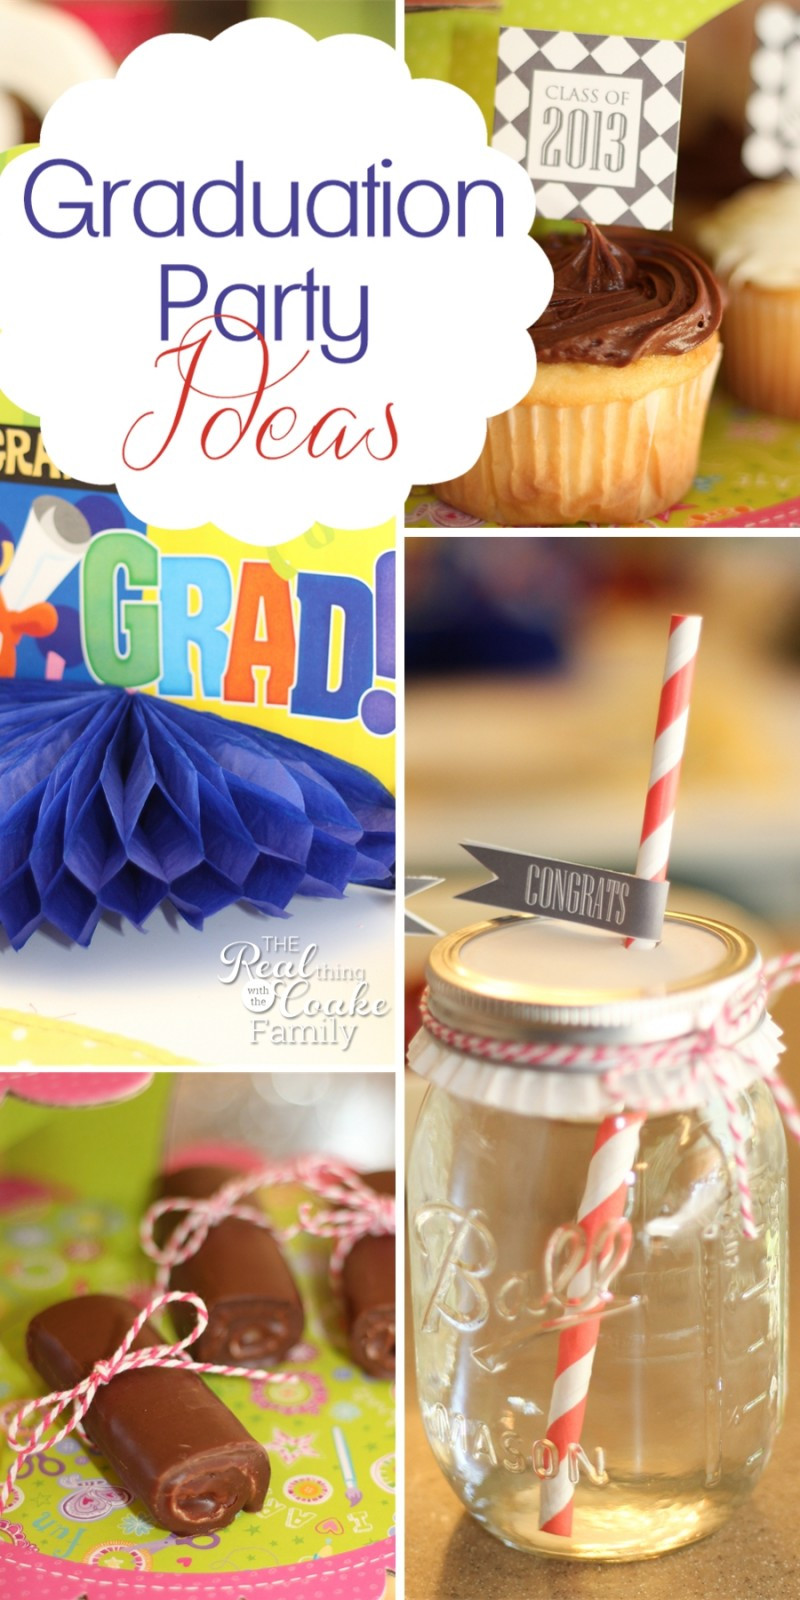 Jr High Graduation Party Ideas
 Quick Easy and Cute Graduation Party Ideas